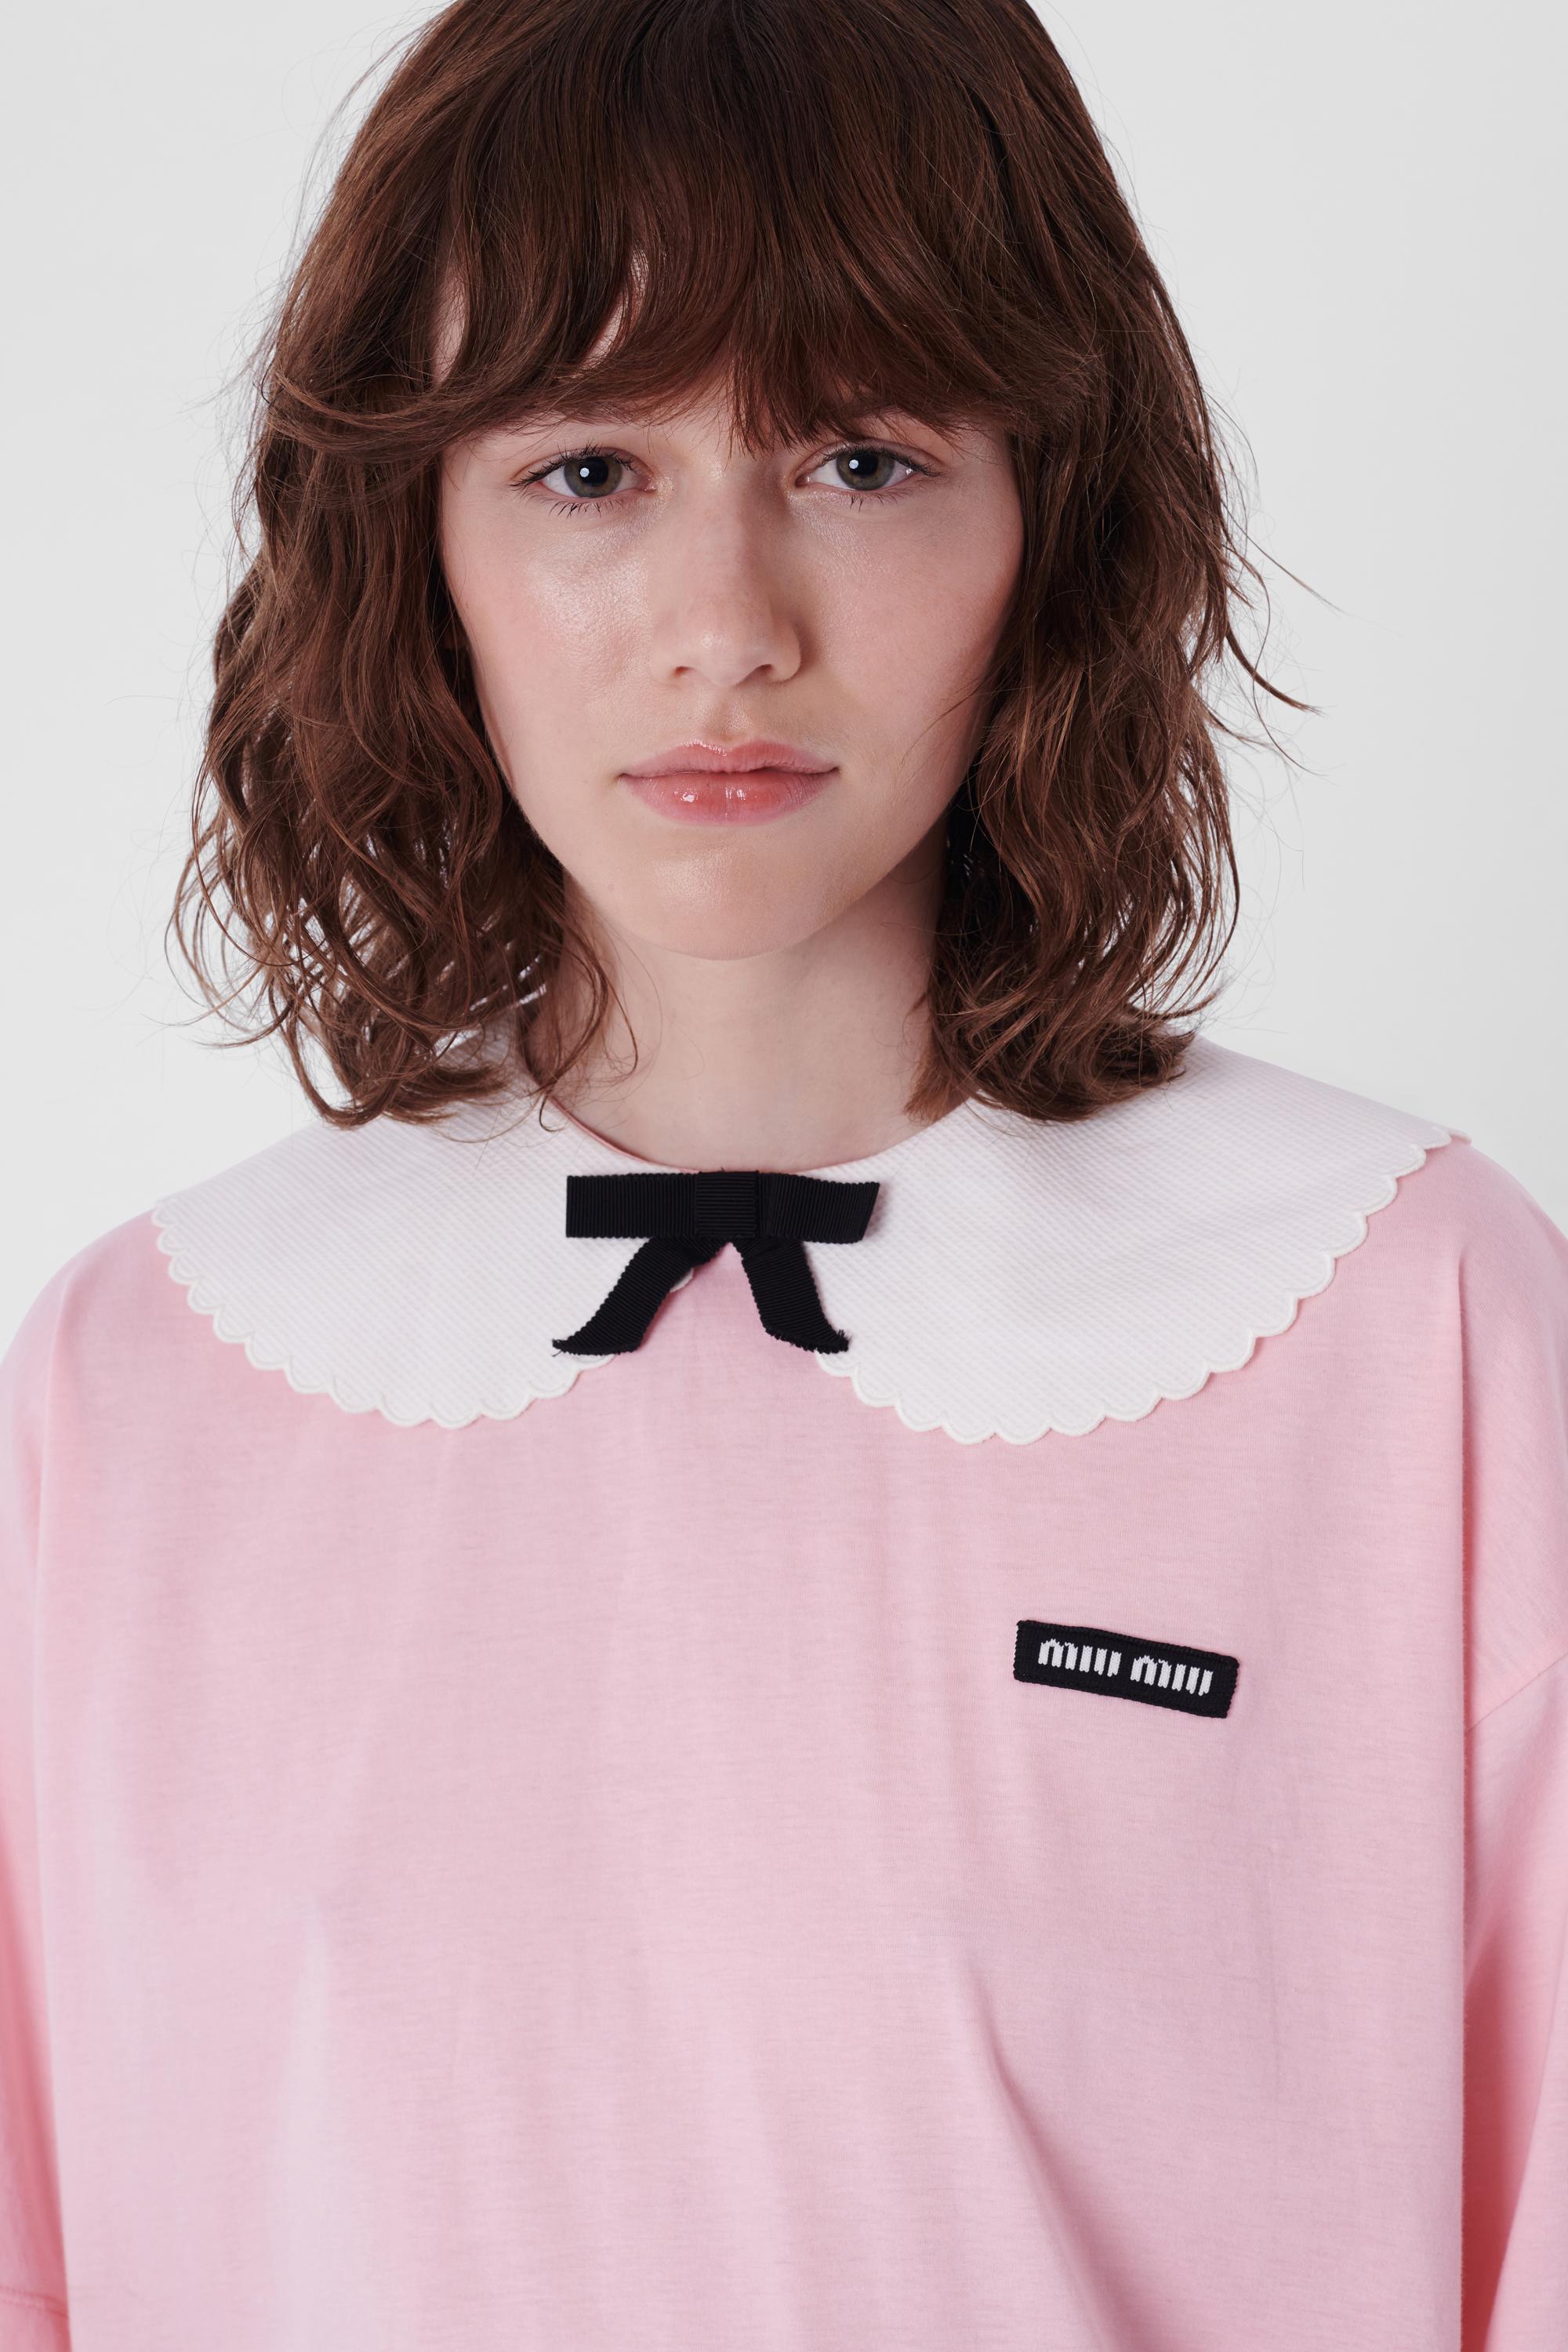 Nordic Poetry is excited to present this Miu Miu pink t-shirt. Features white scallop edged collar, black ribbon bow, Miu Miu tag motif and button back closure. Pre-loved, in excellent condition - never been worn. Authenticity Guaranteed.

Label